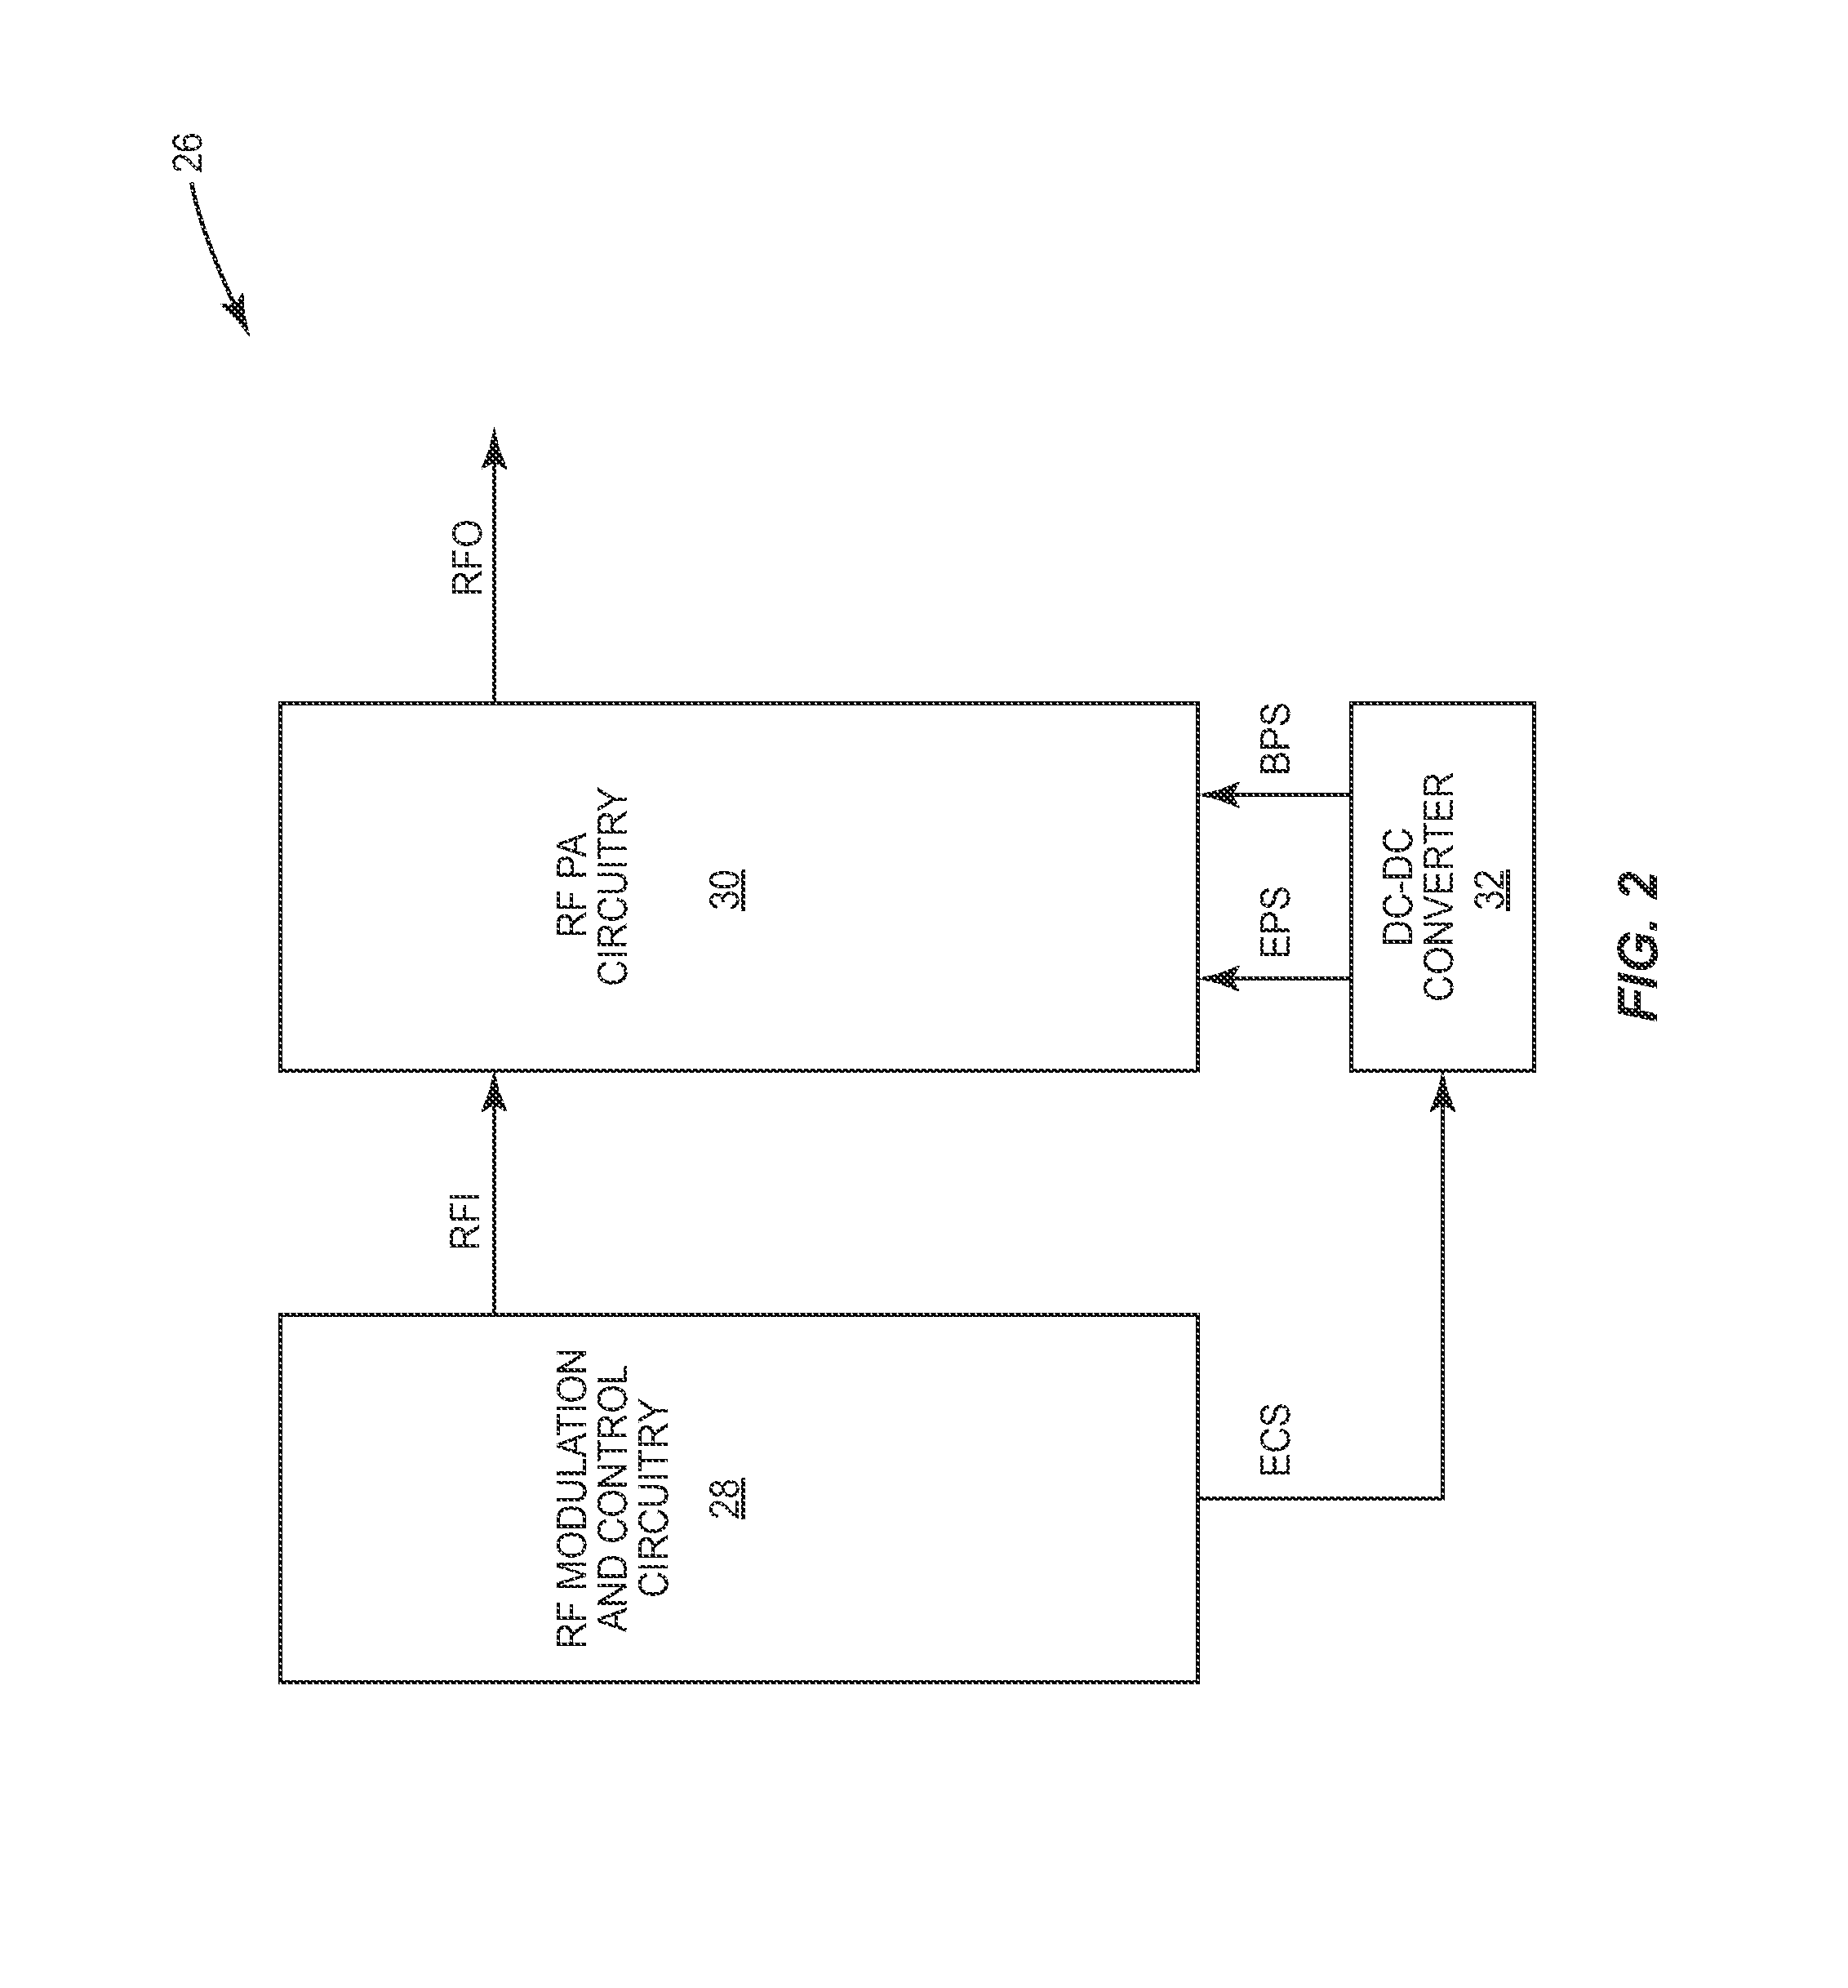 Direct current (DC)-dc converter having a multi-stage output filter